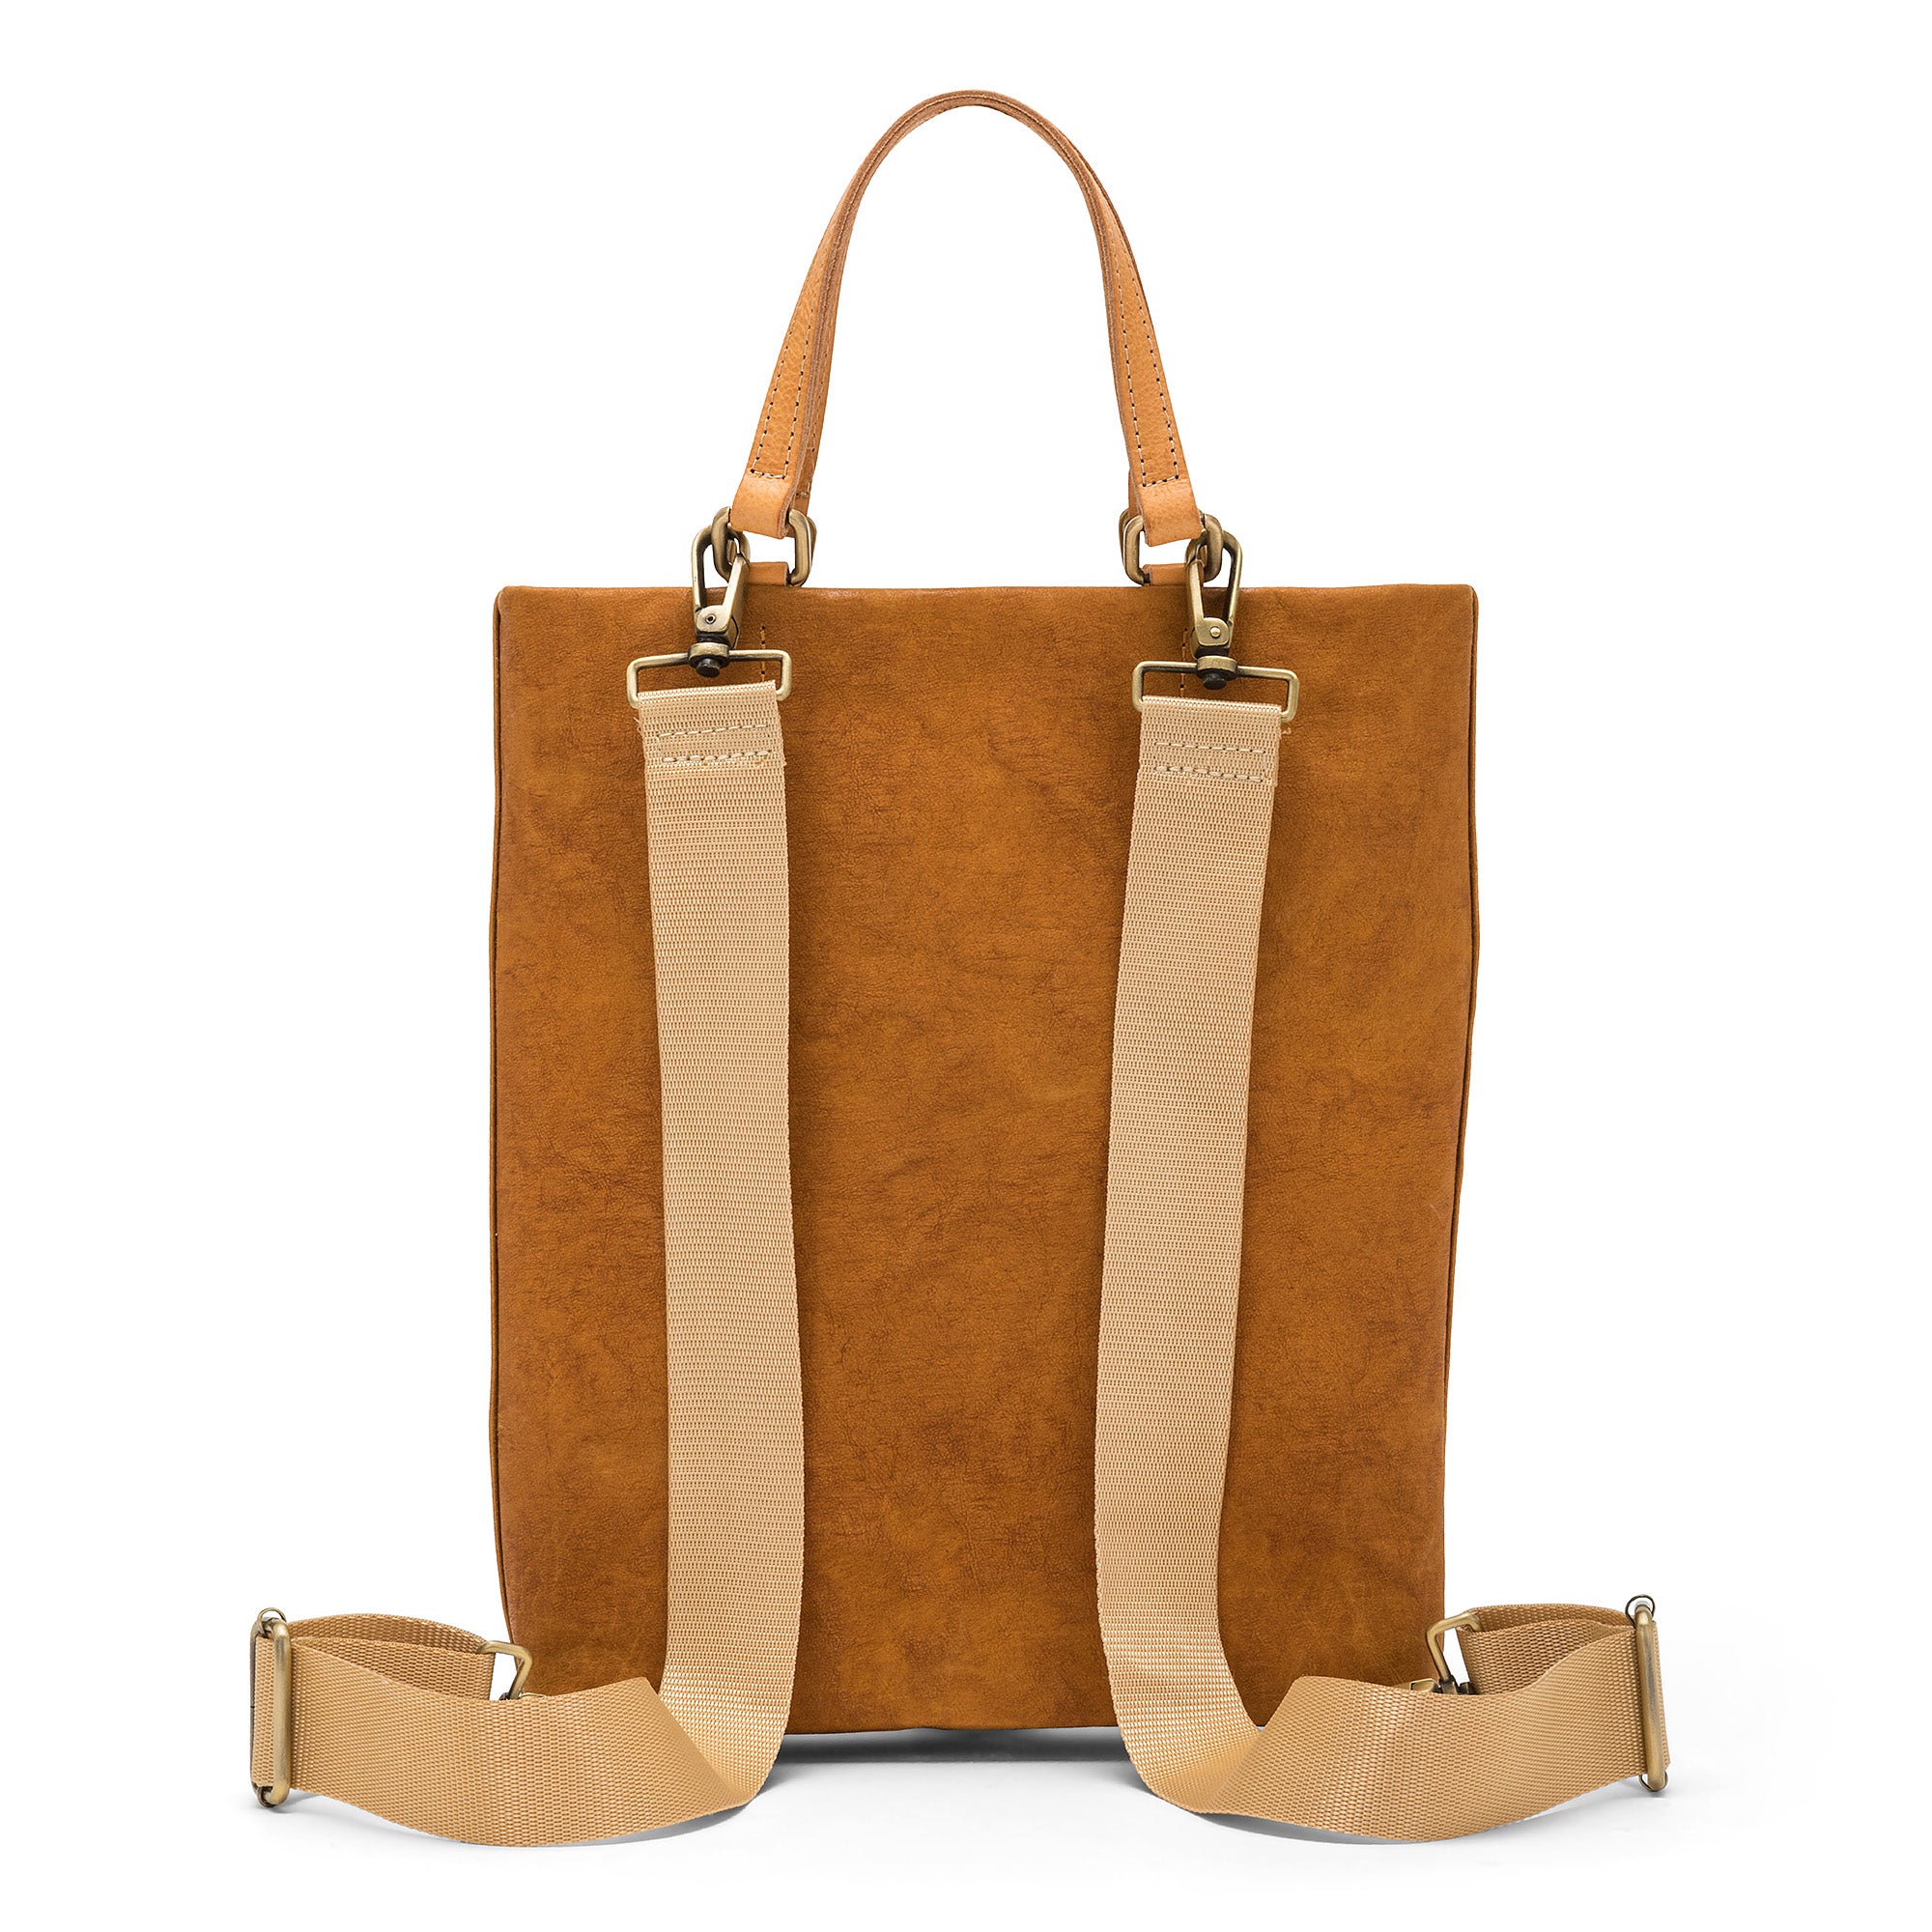 Clare V, Bags, Clare V Marcelle Tan Suede Leather Backpack